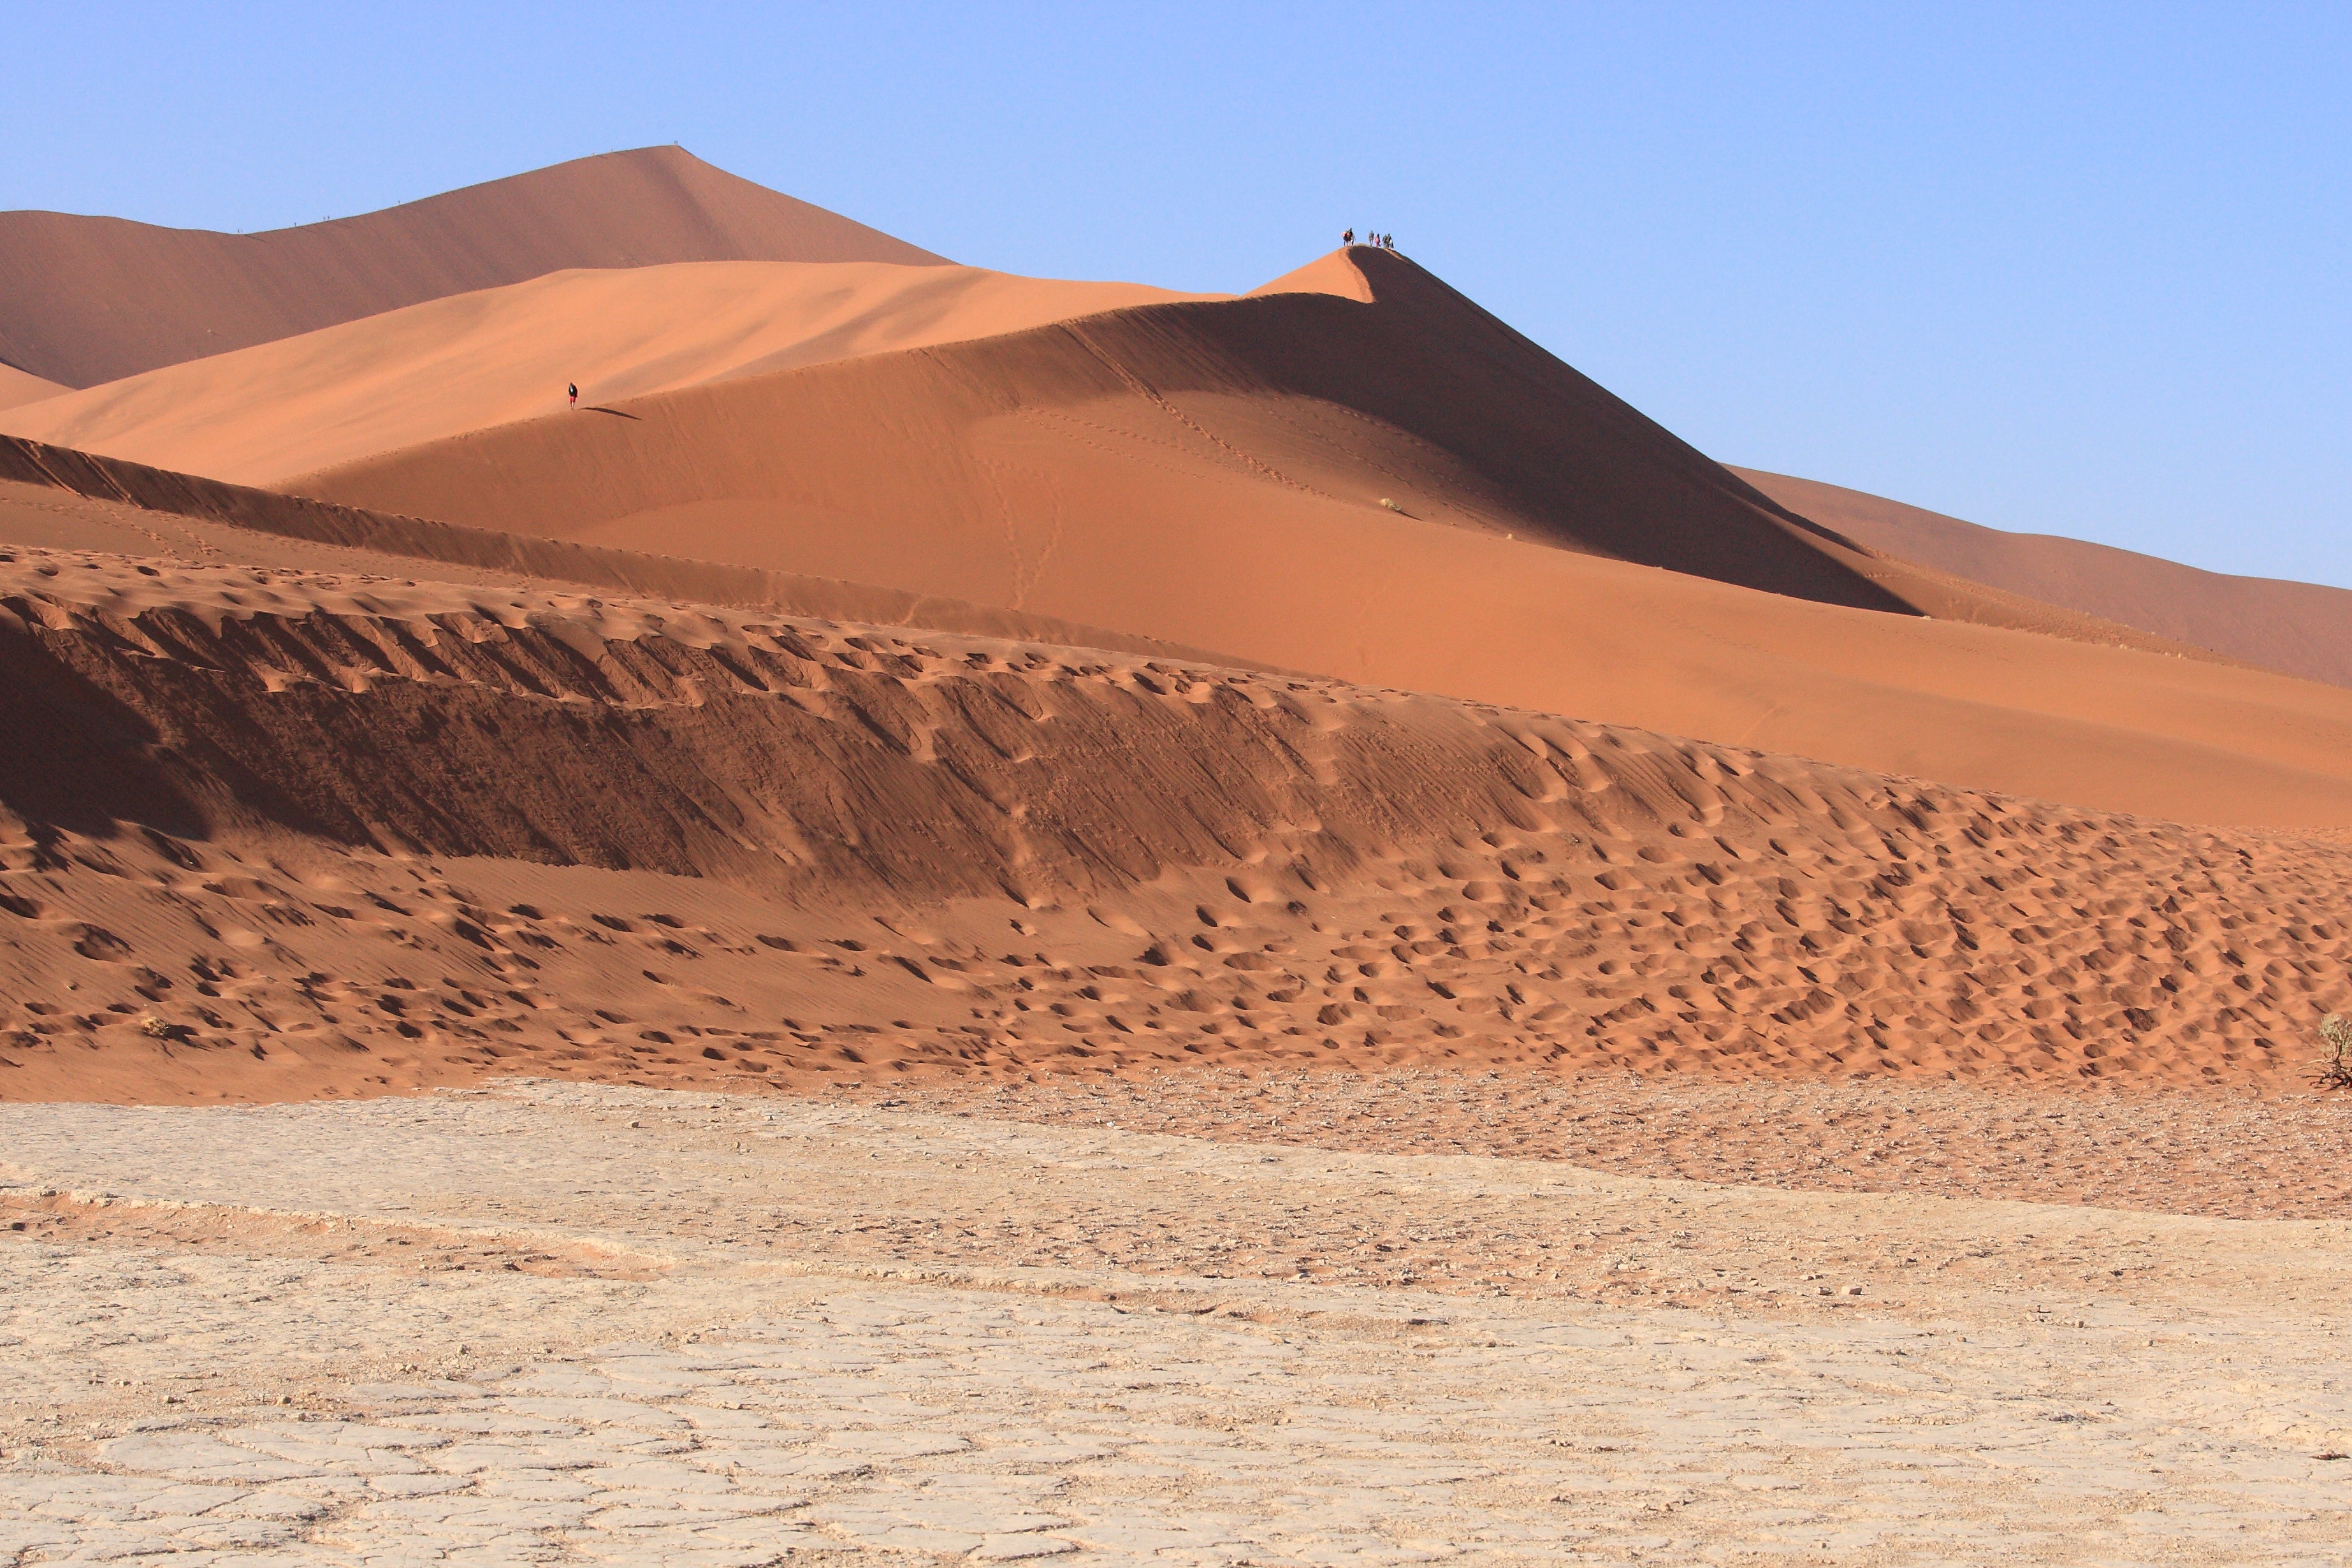 The Big Daddy dune is one of the three largest in Namib-Naukluft National Park